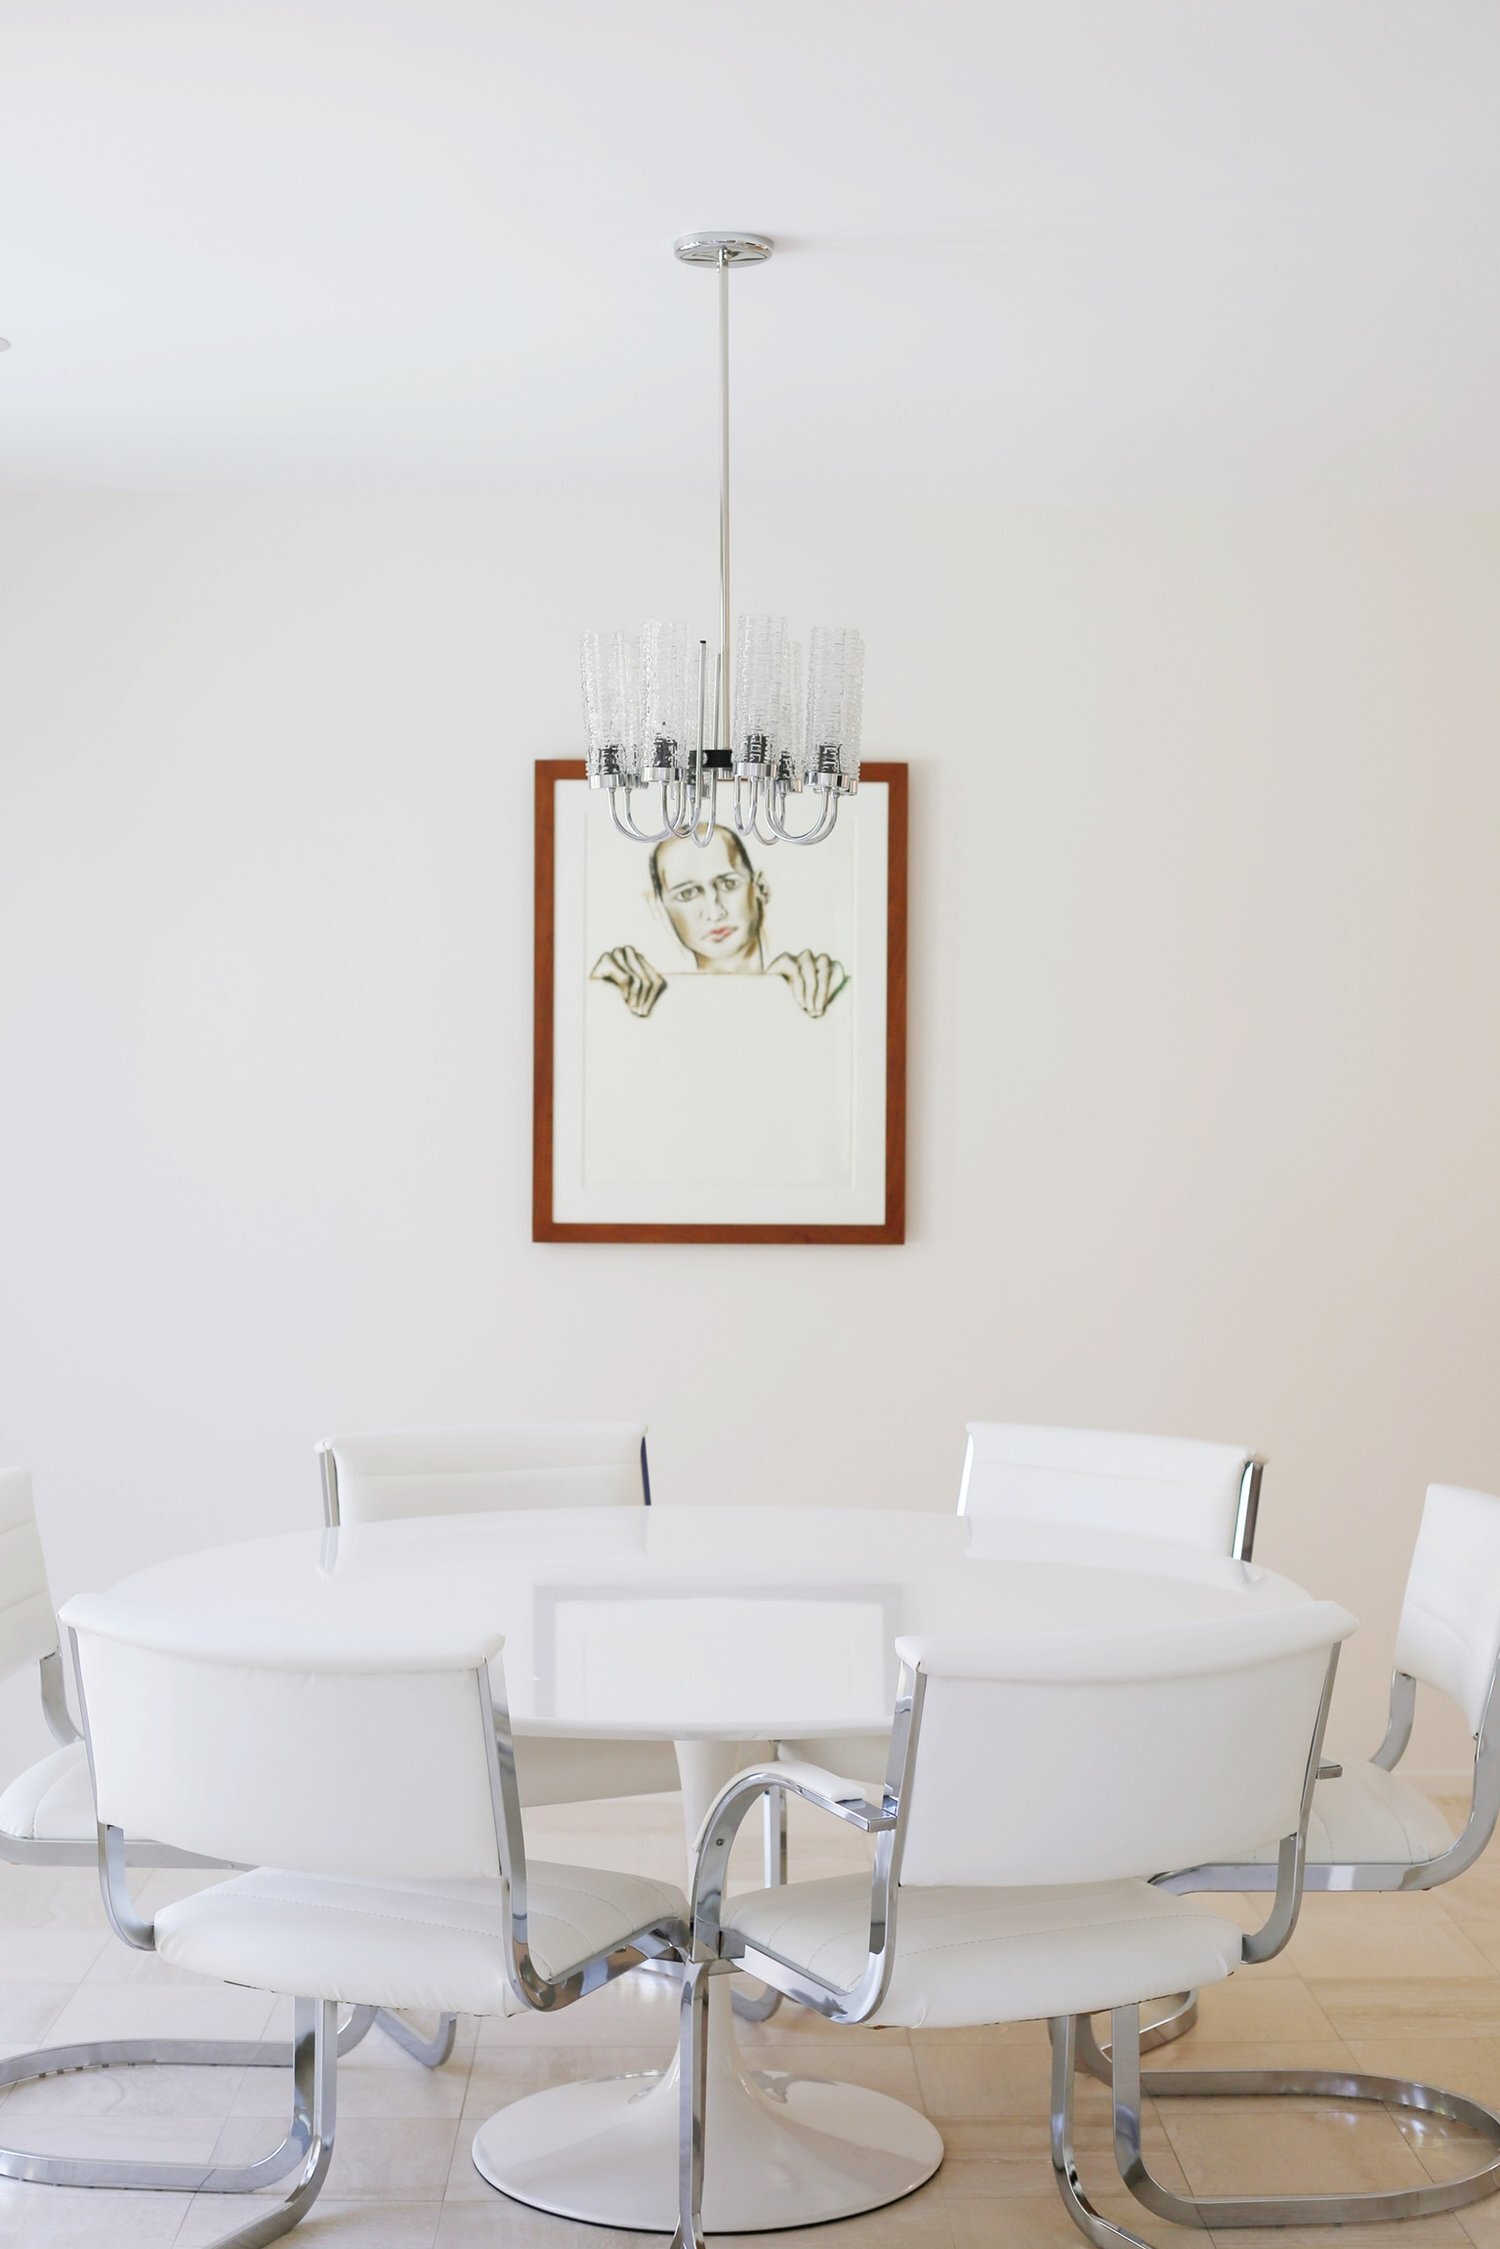   Knoll Tulip Table &nbsp;with painting by&nbsp; Francesco Clemente &nbsp;by 1995, pastel on paper. 